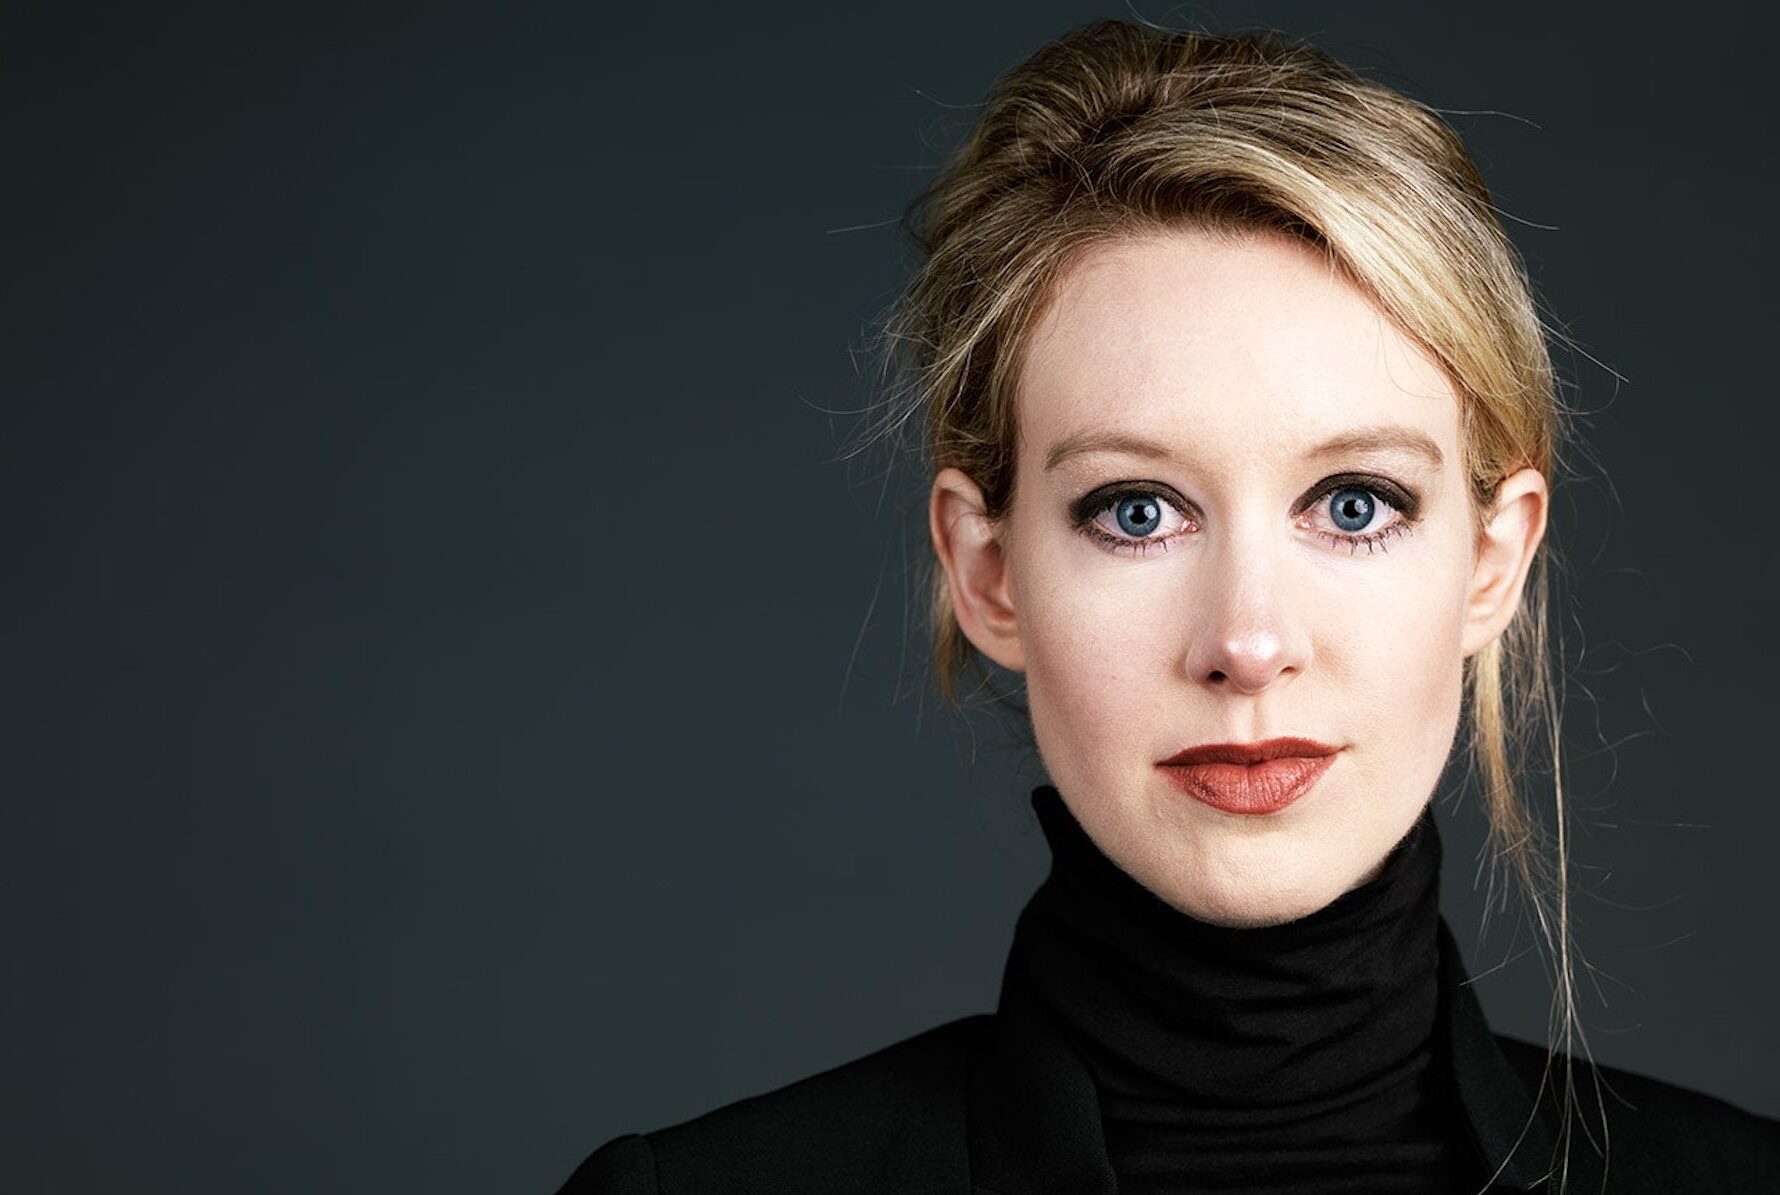 Who does Elizabeth Holmes think she is? The wildest claims from the